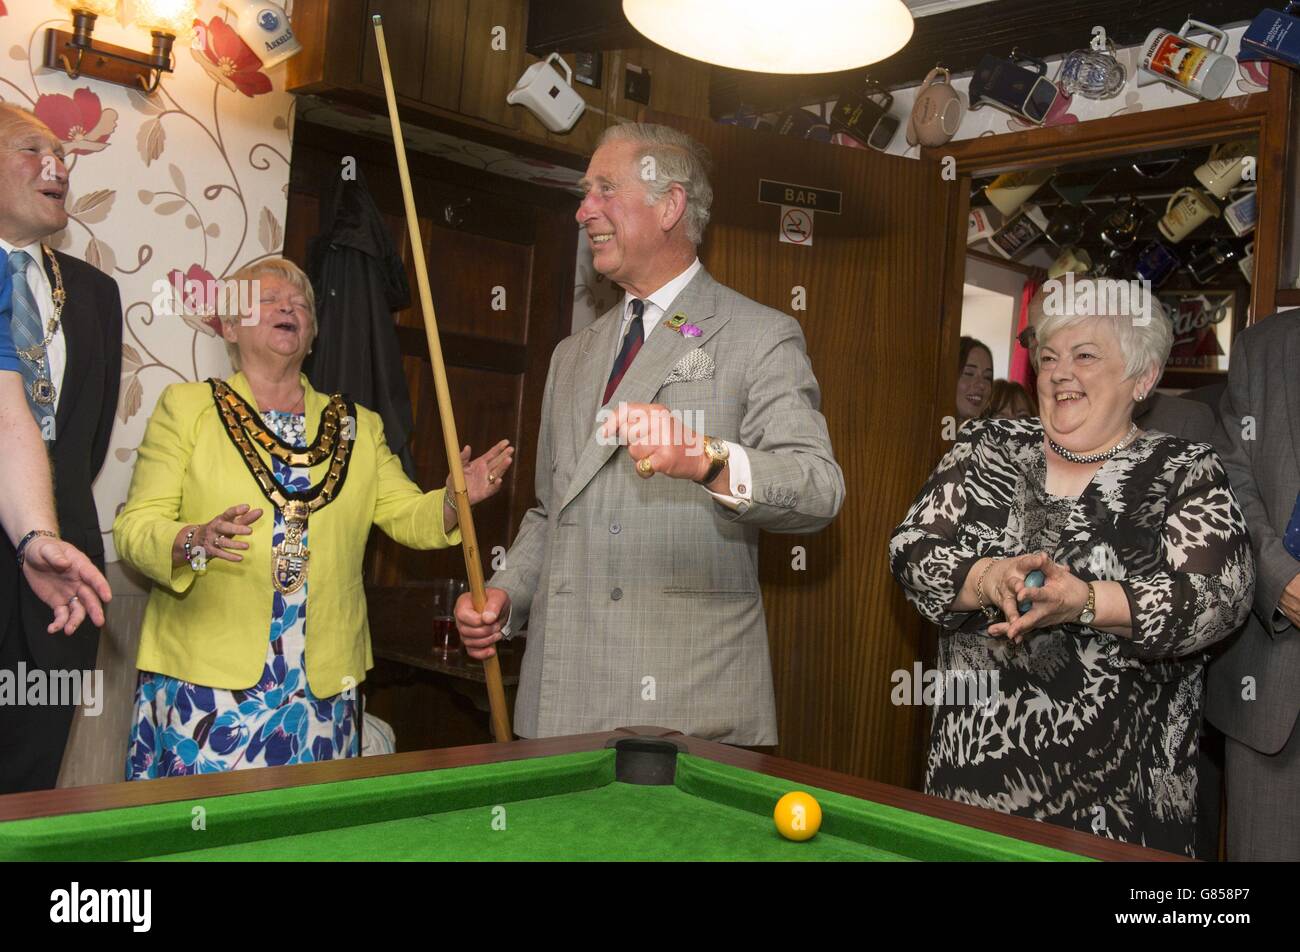 The Prince of Wales tries his hand at pool during his visit to The Glan yr Afon Arms in Talgarreg, Llandysul, which is supported by The Prince's Pub is the Hub initiative on the last day of his week long visit to Wales. Stock Photo